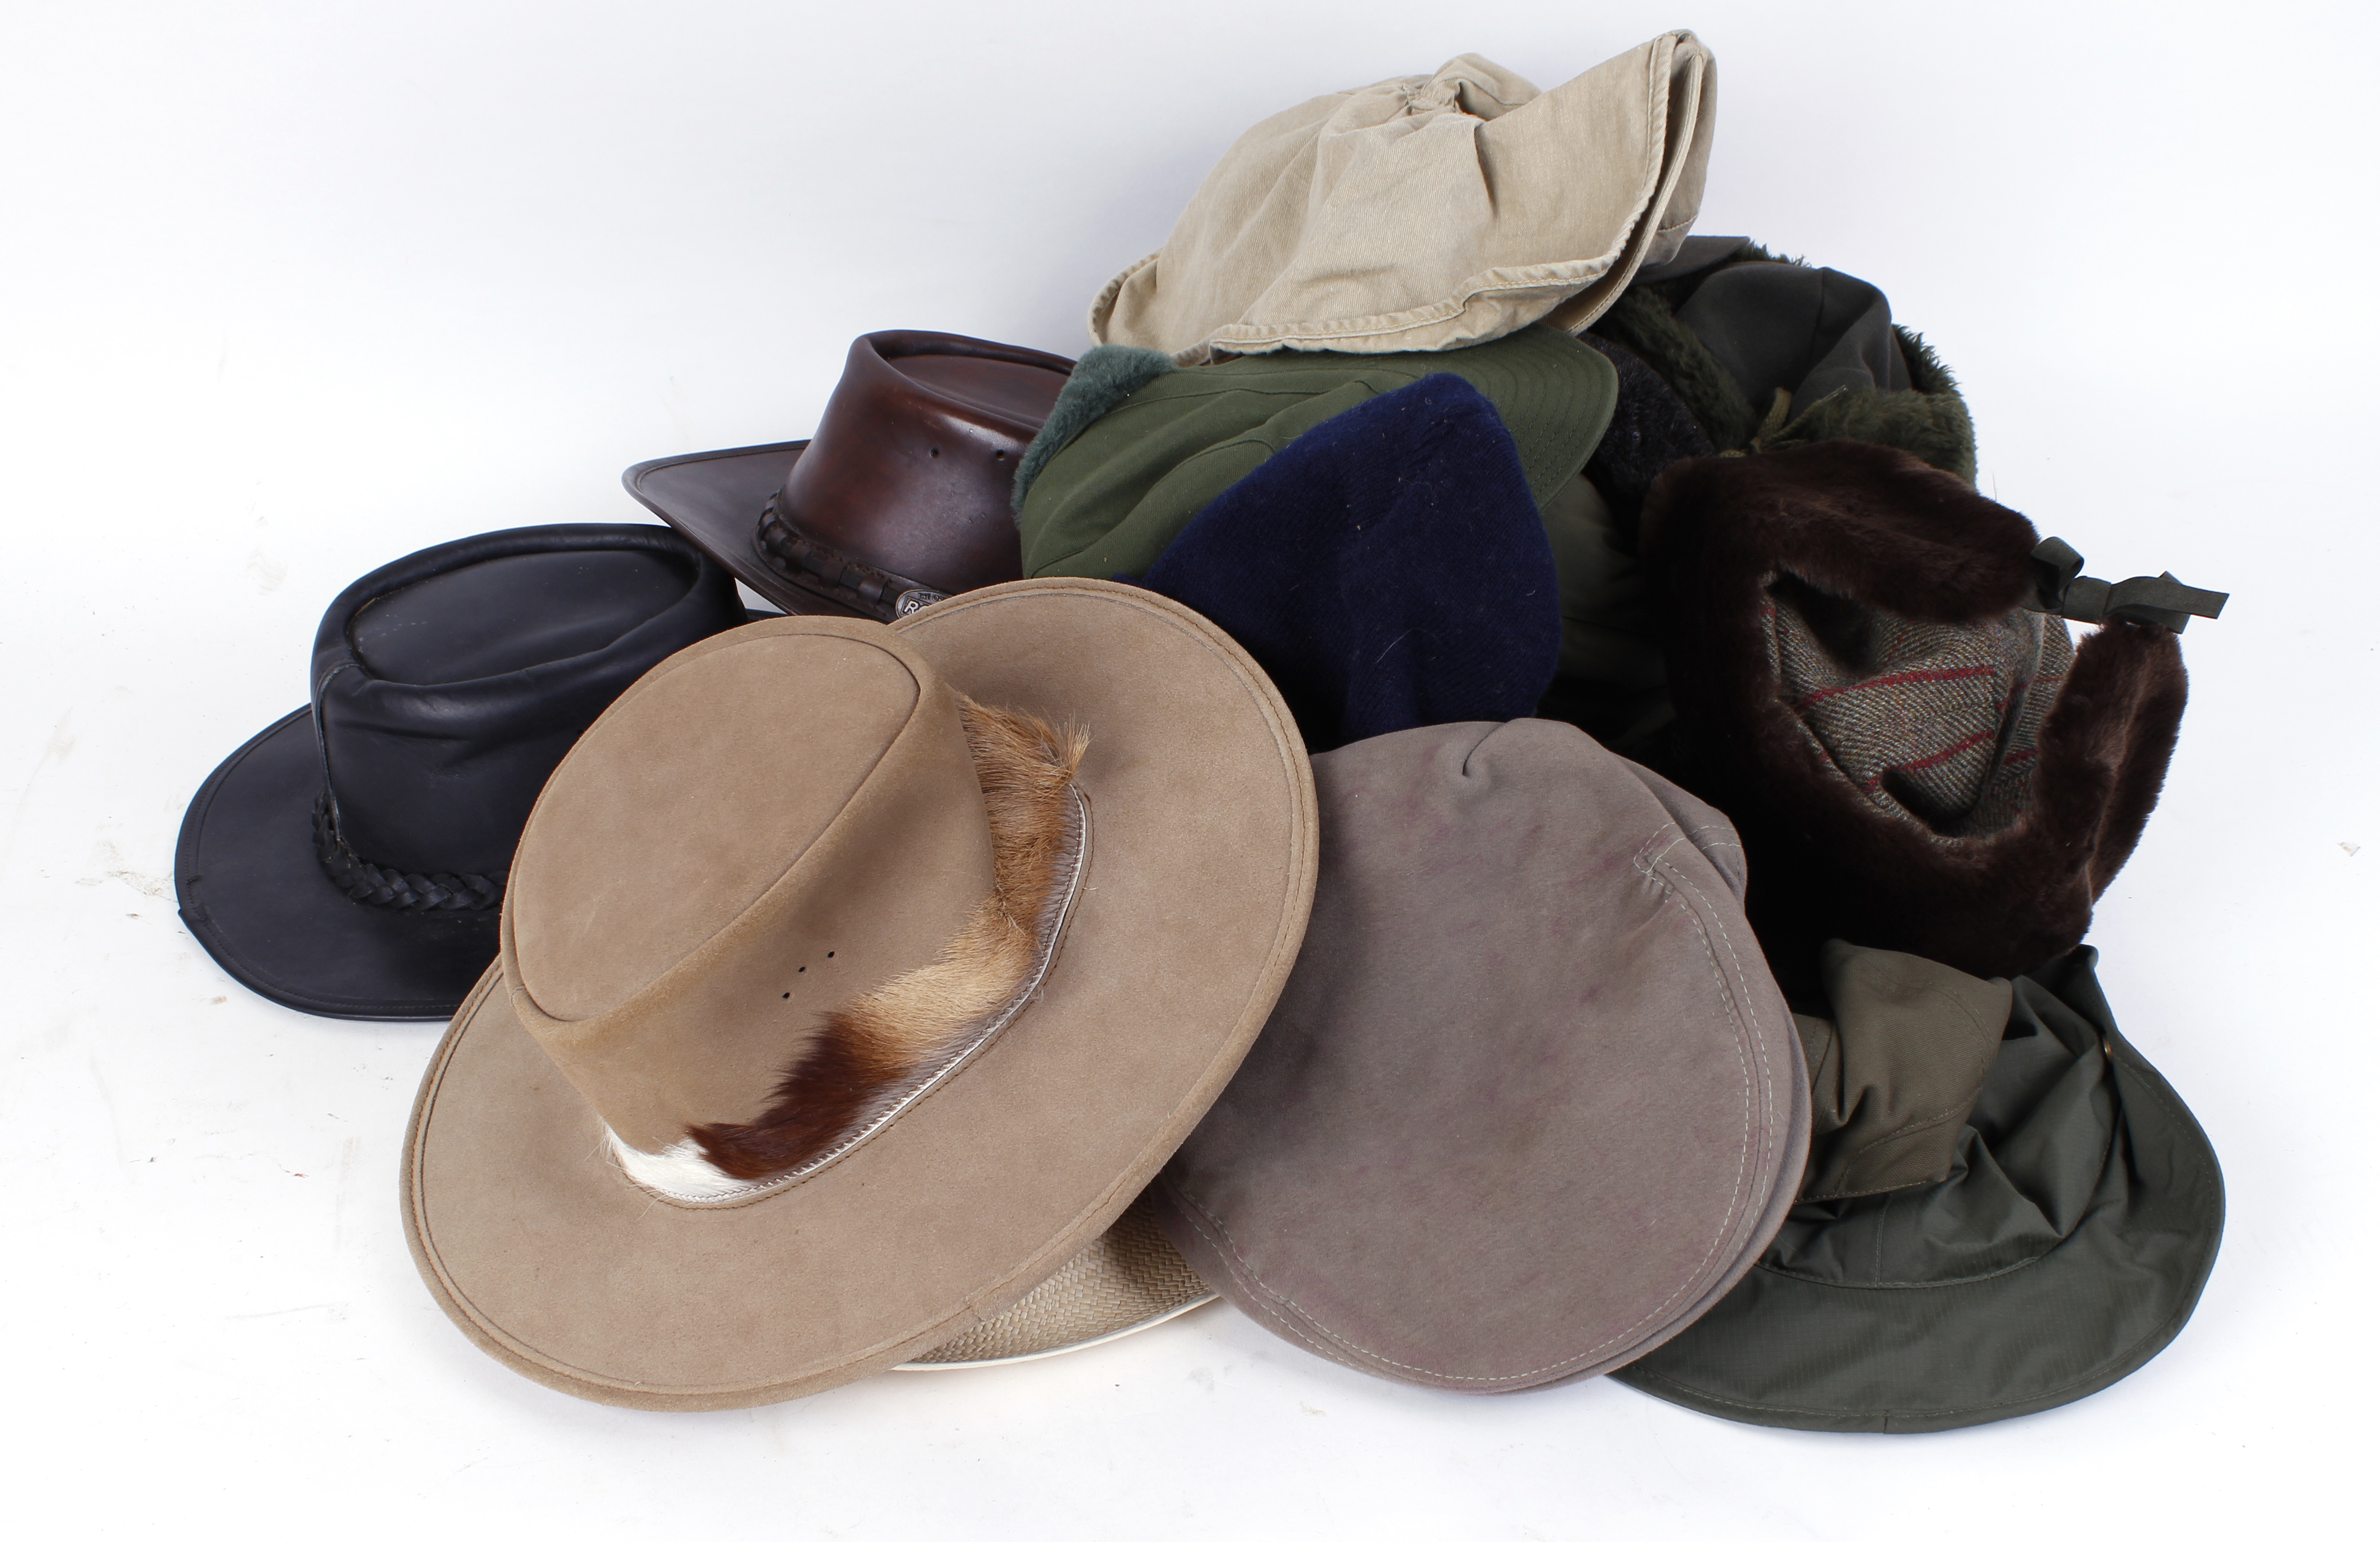 Box containing quantity of various hats and caps by Harkila, Beretta, Sealand, Barbour and others